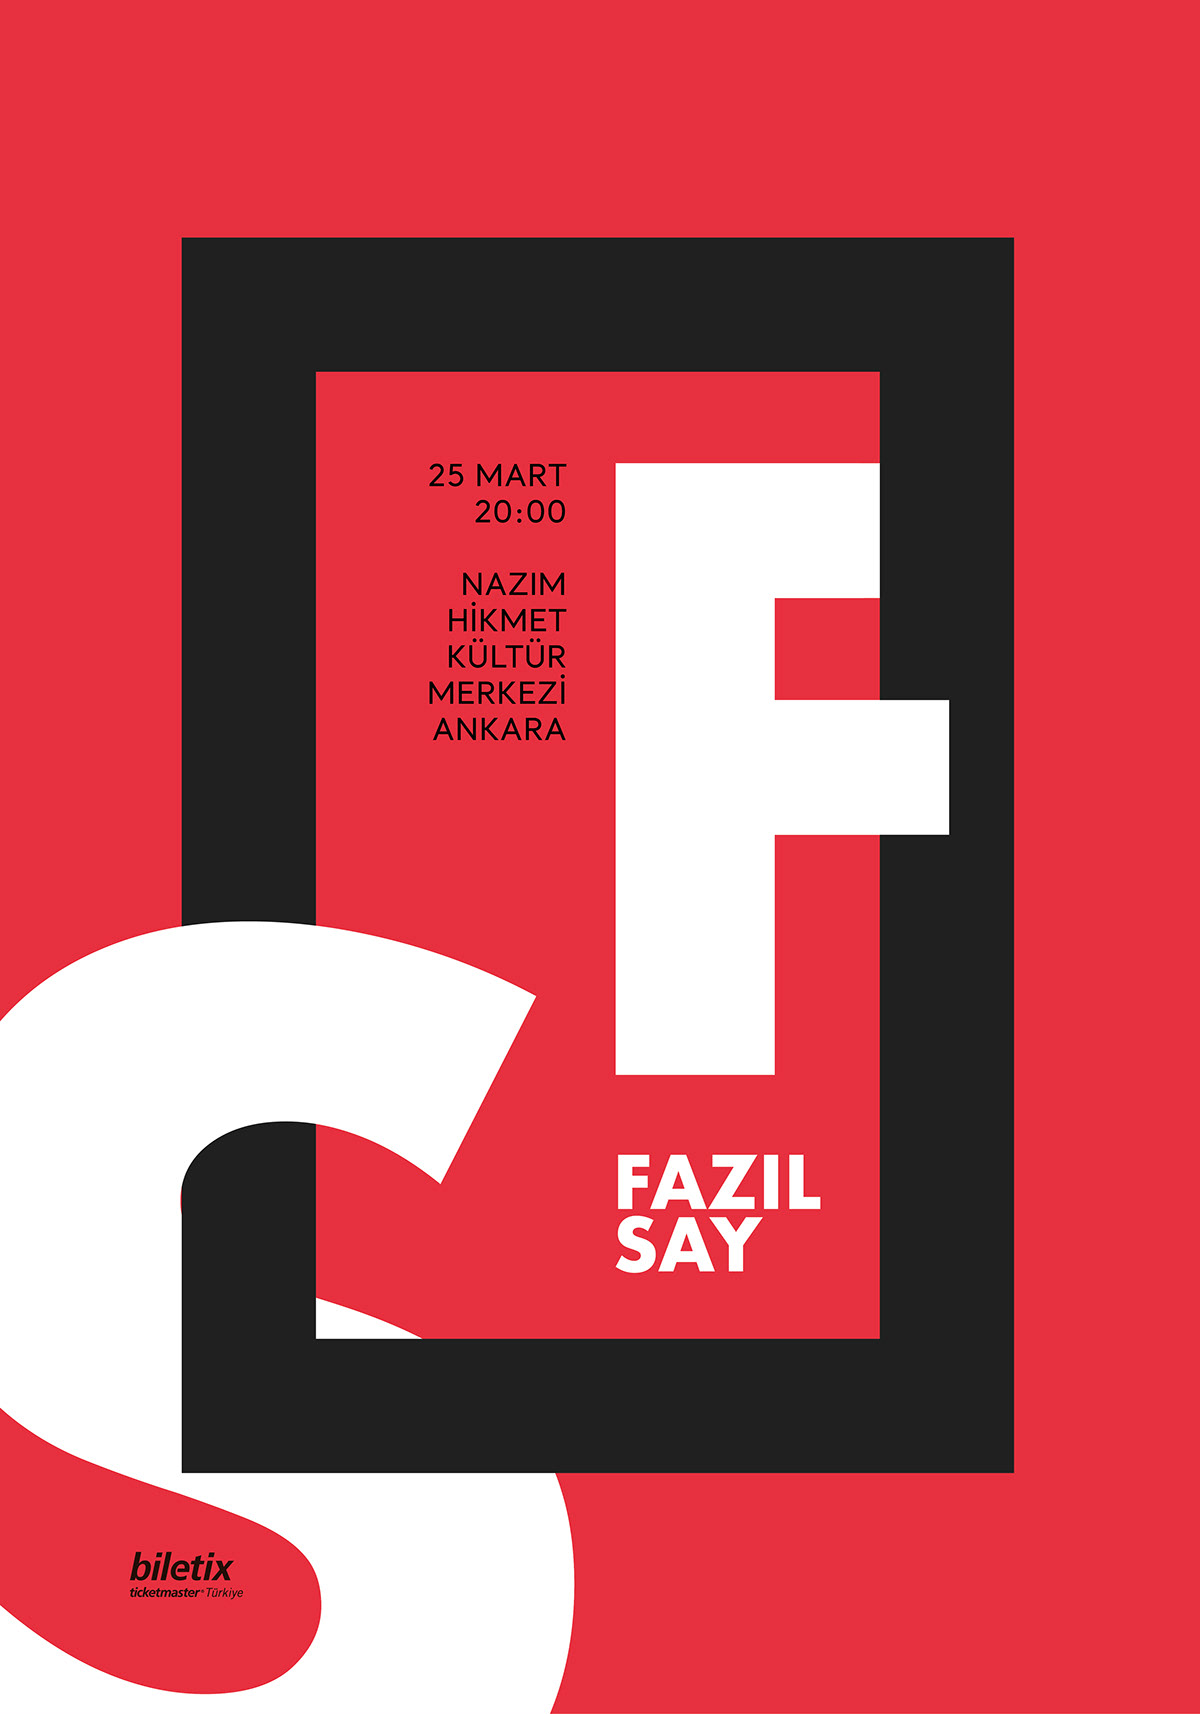 Fazıl Say Piano classical music free poster adobeawards